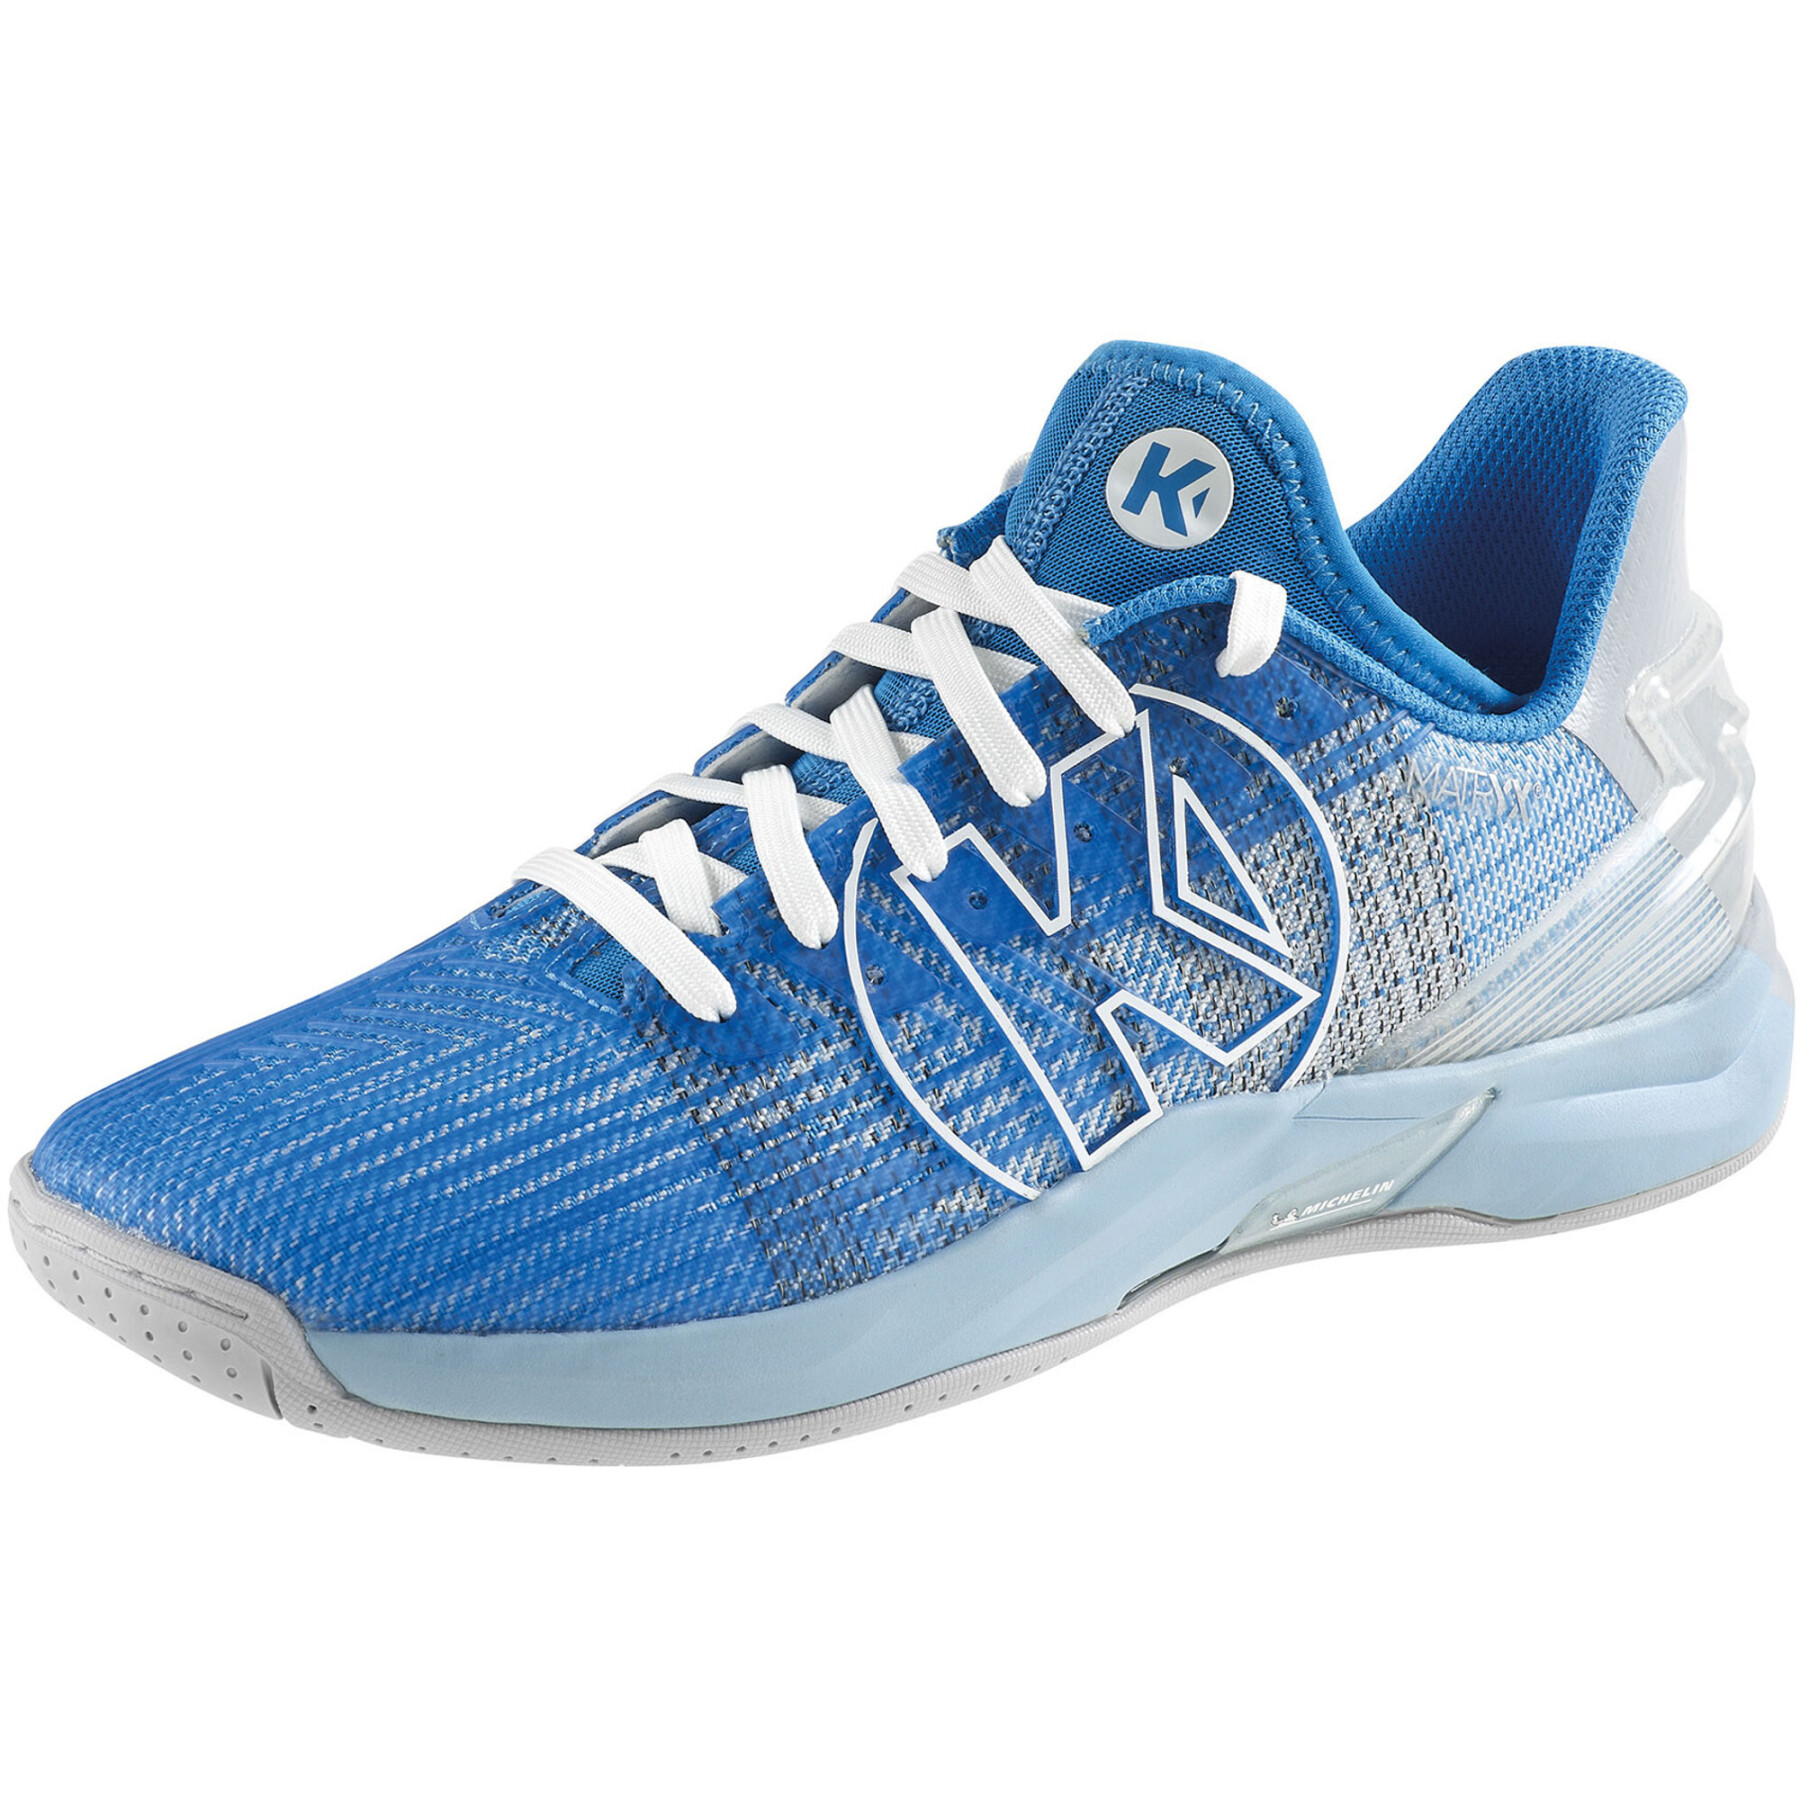 Women's shoes Kempa Attack One 2.0